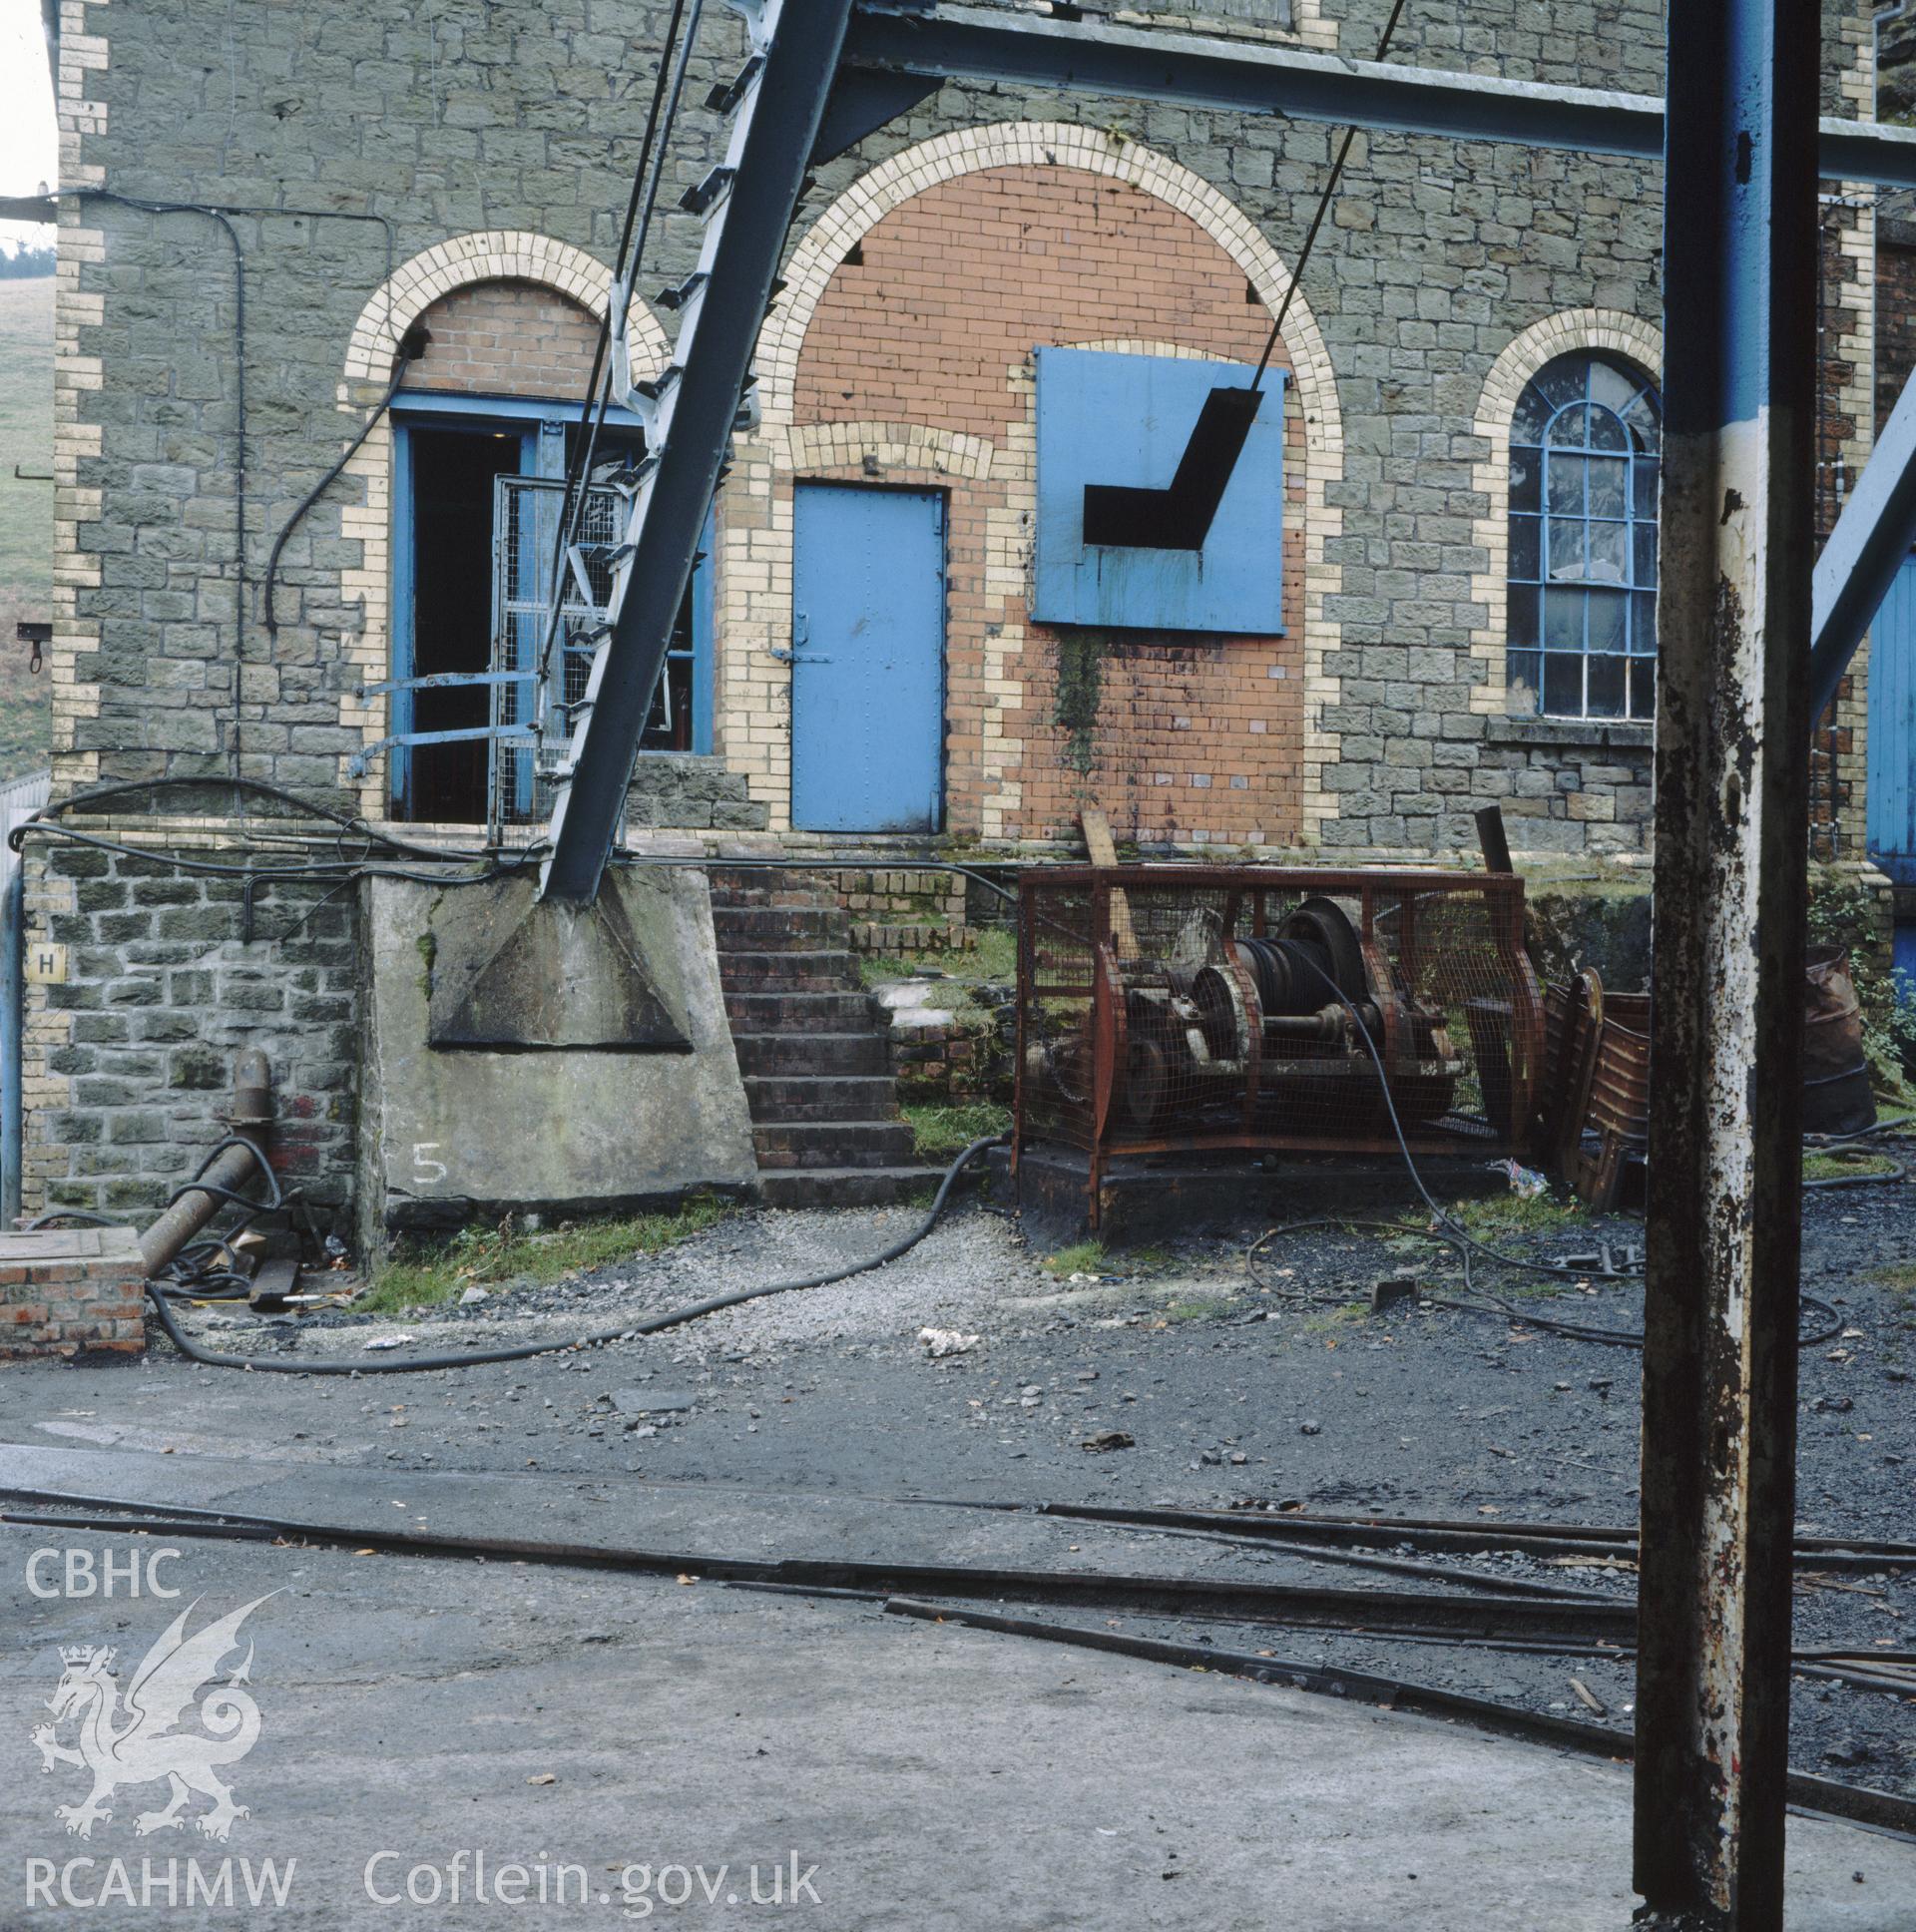 Digital copy of an acetate negative showing surface building at Blaenserchan Colliery from the John Cornwell Collection.